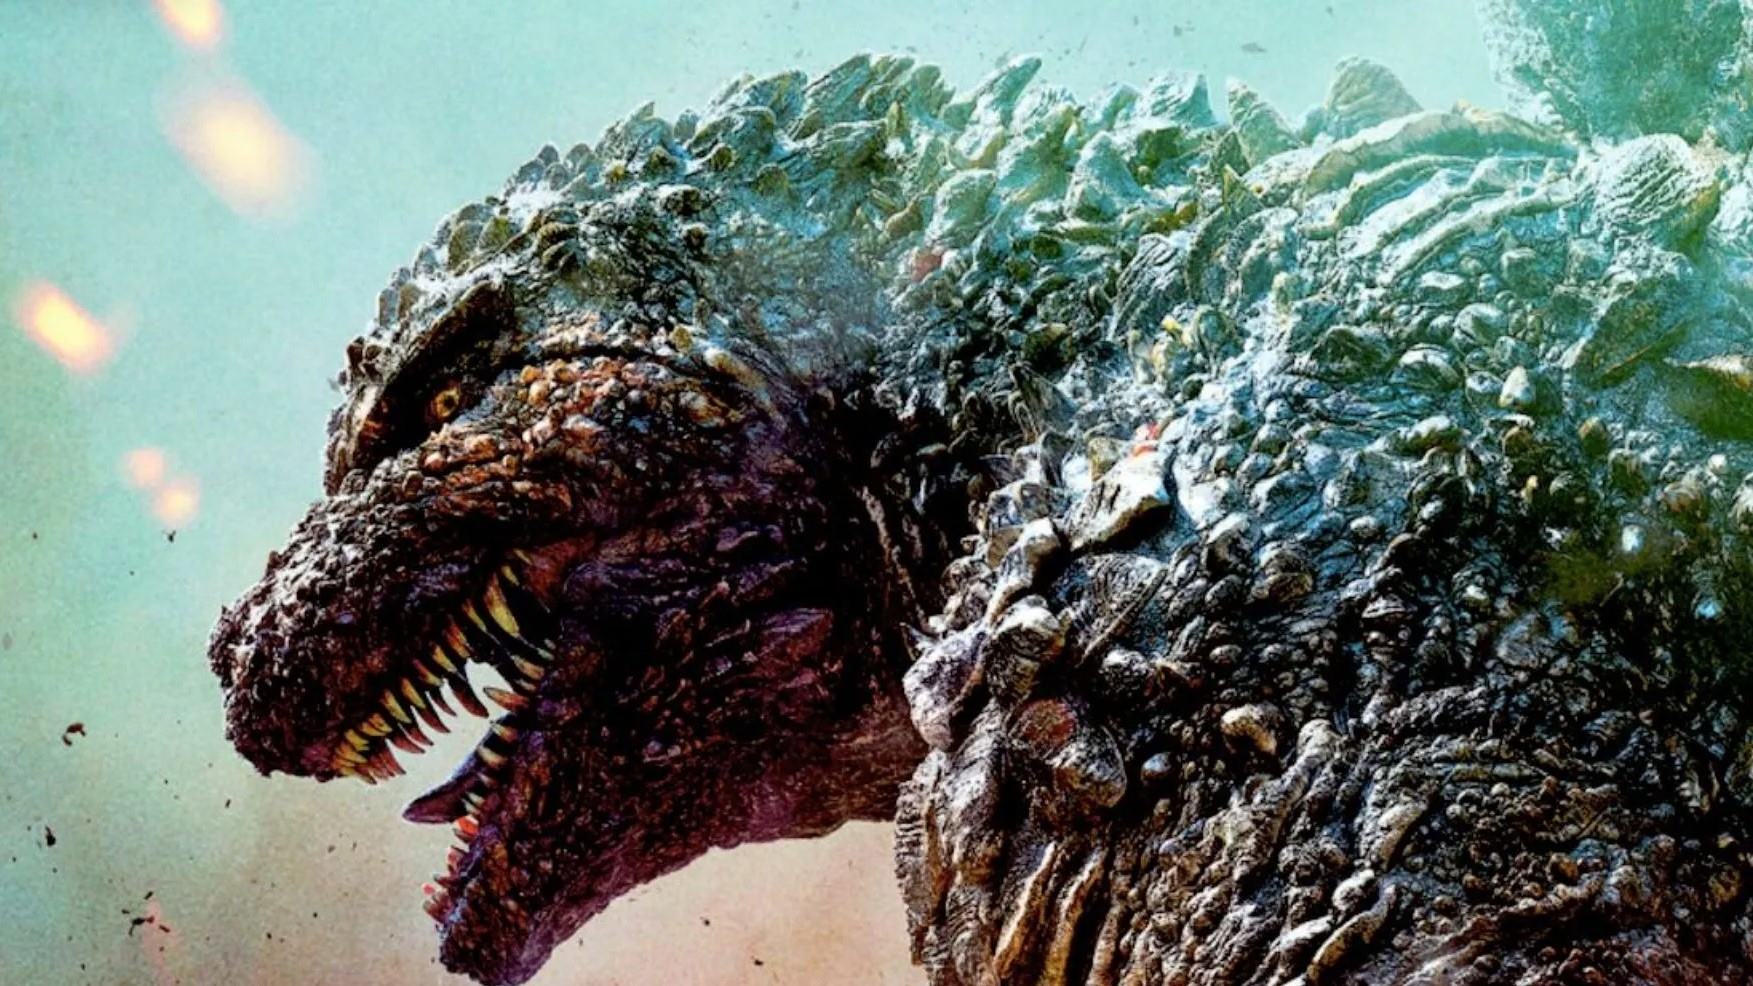 The Origins Of Godzilla: Is The Monster Based On A Real Creature?